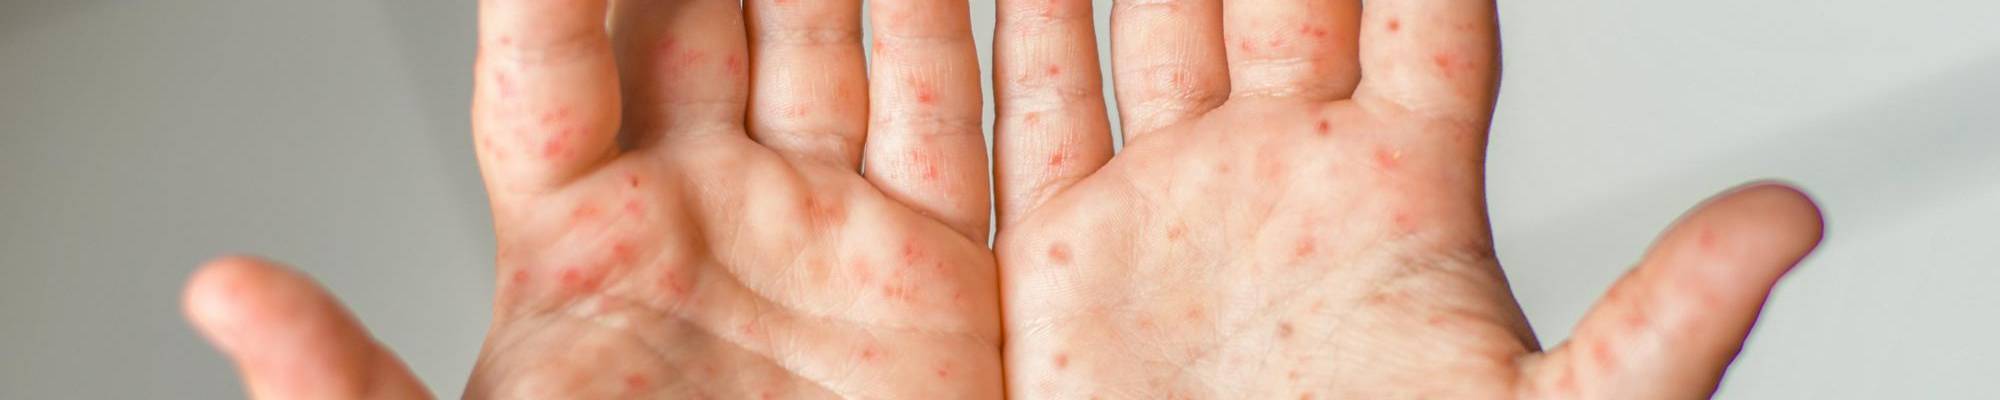 treatment for hand, foot, and mouth disease